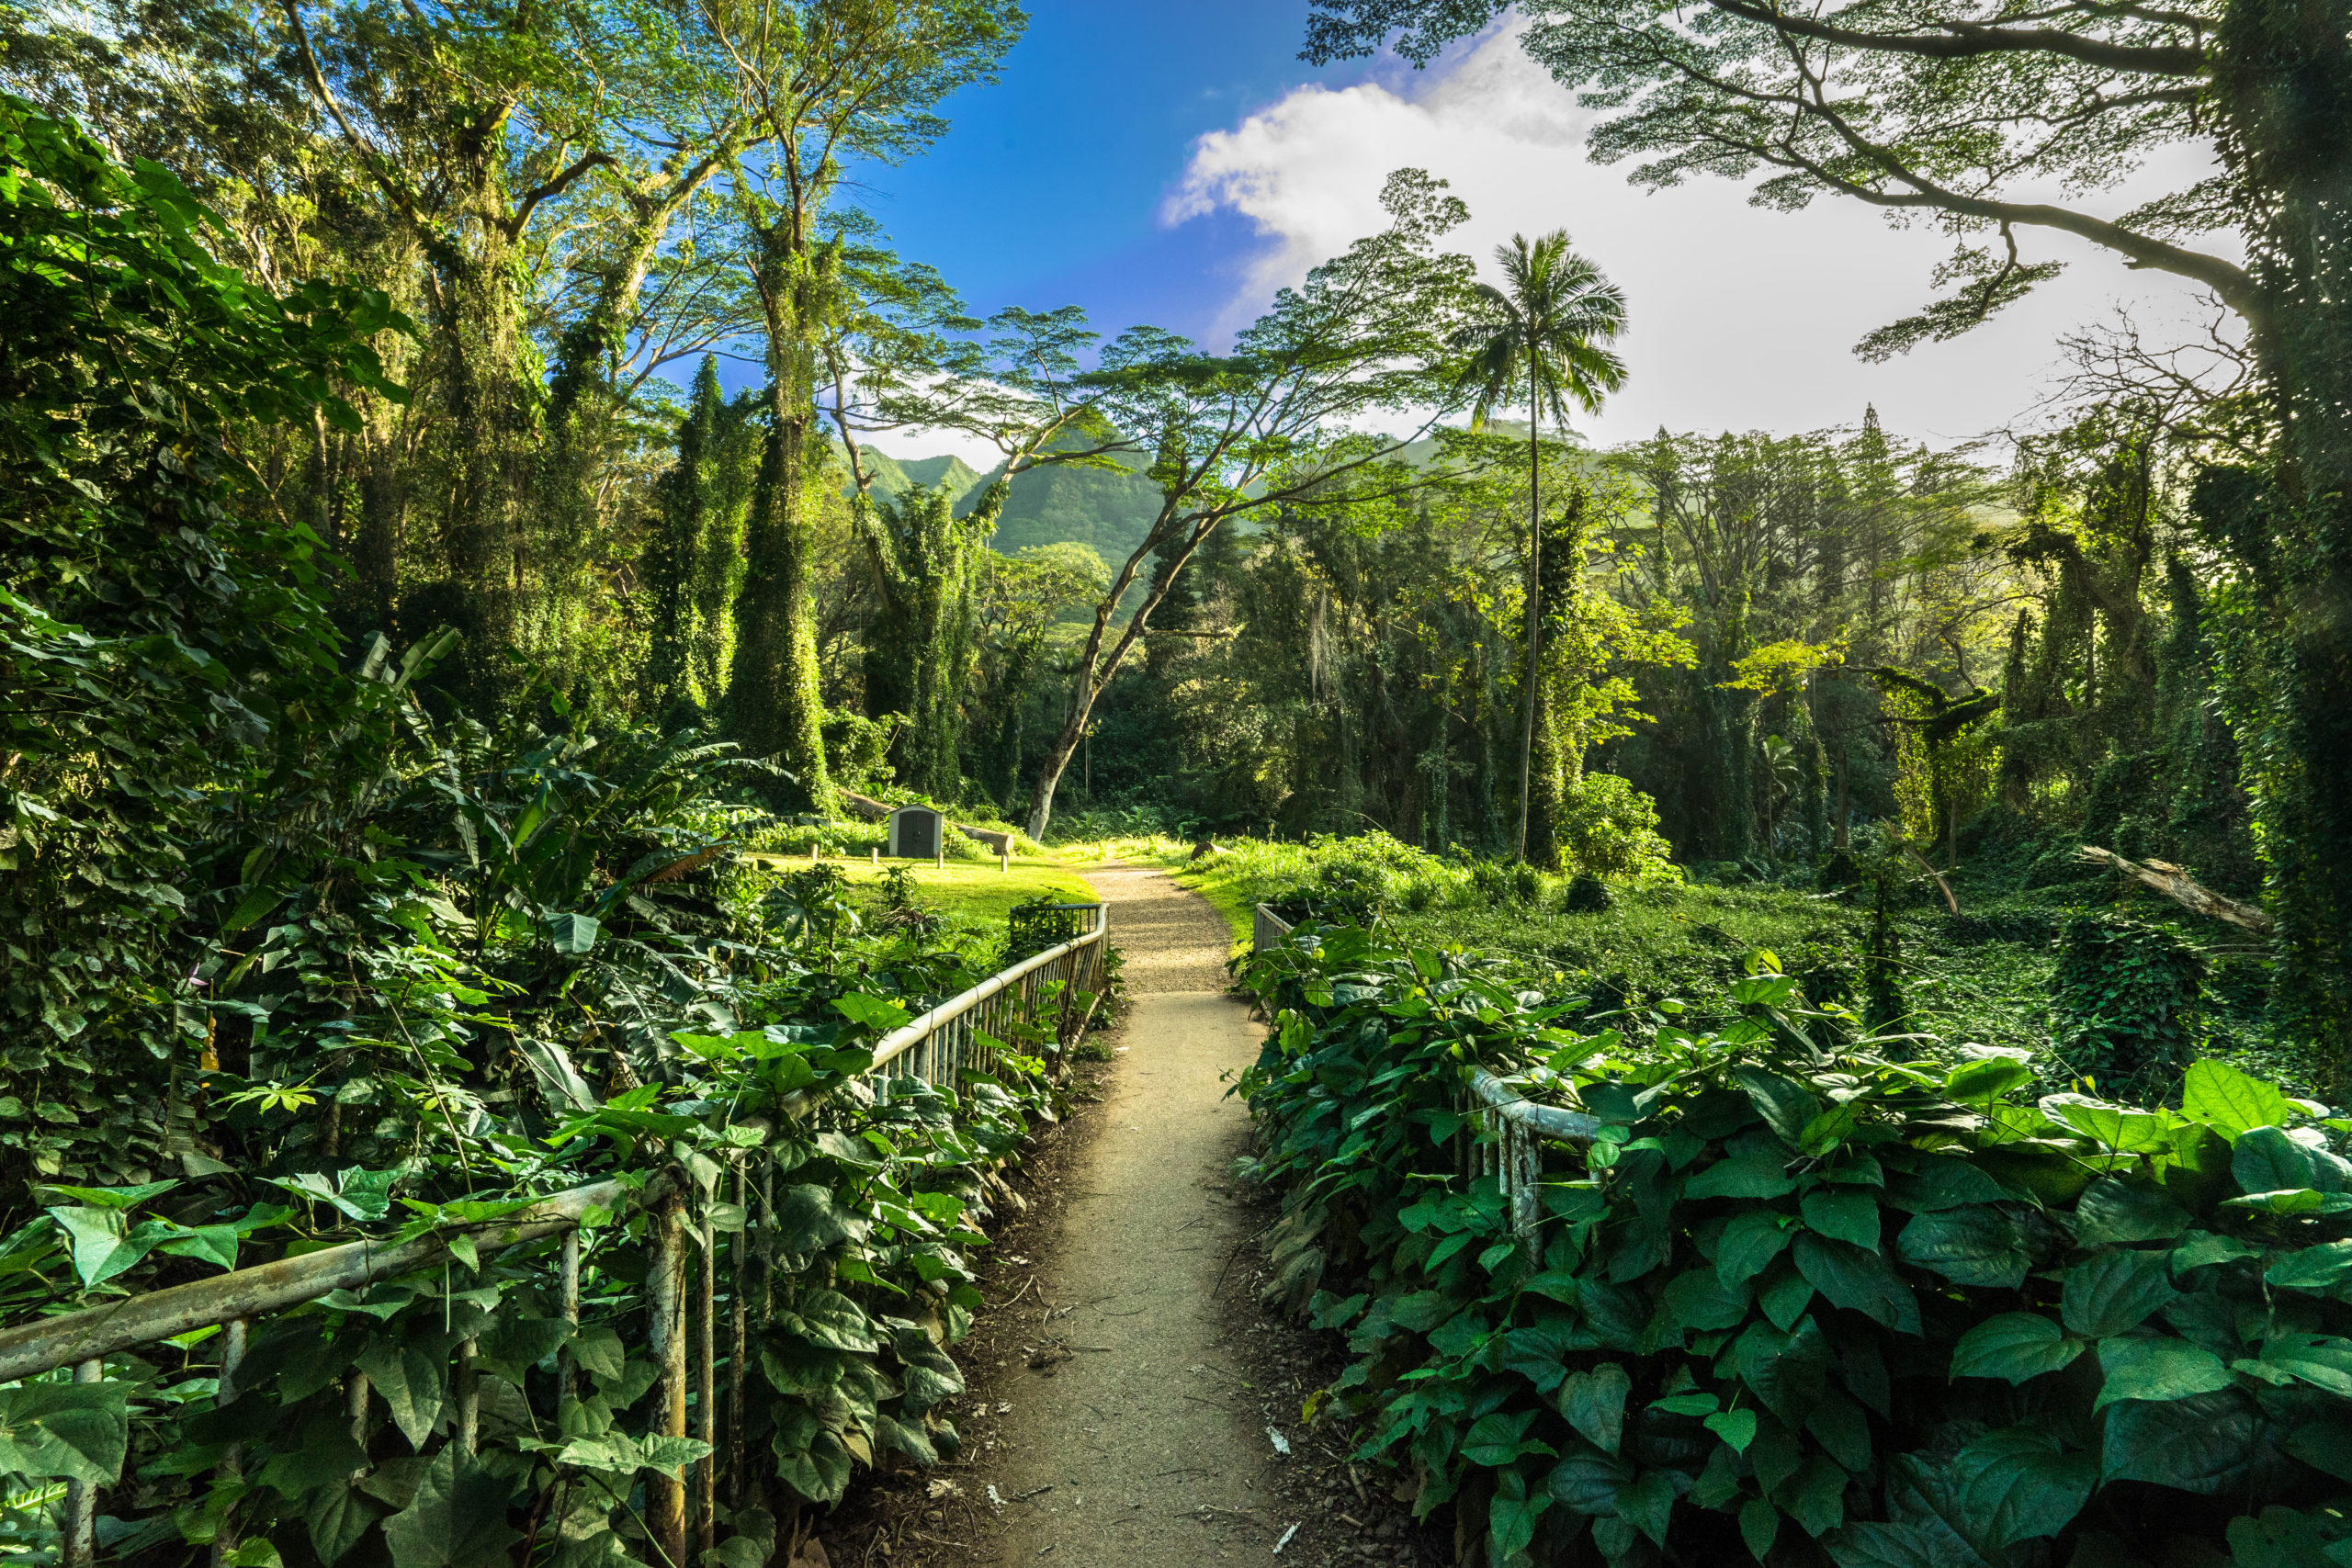 10 BEST EASY HIKES ON OAHU WITH GREAT VIEWS